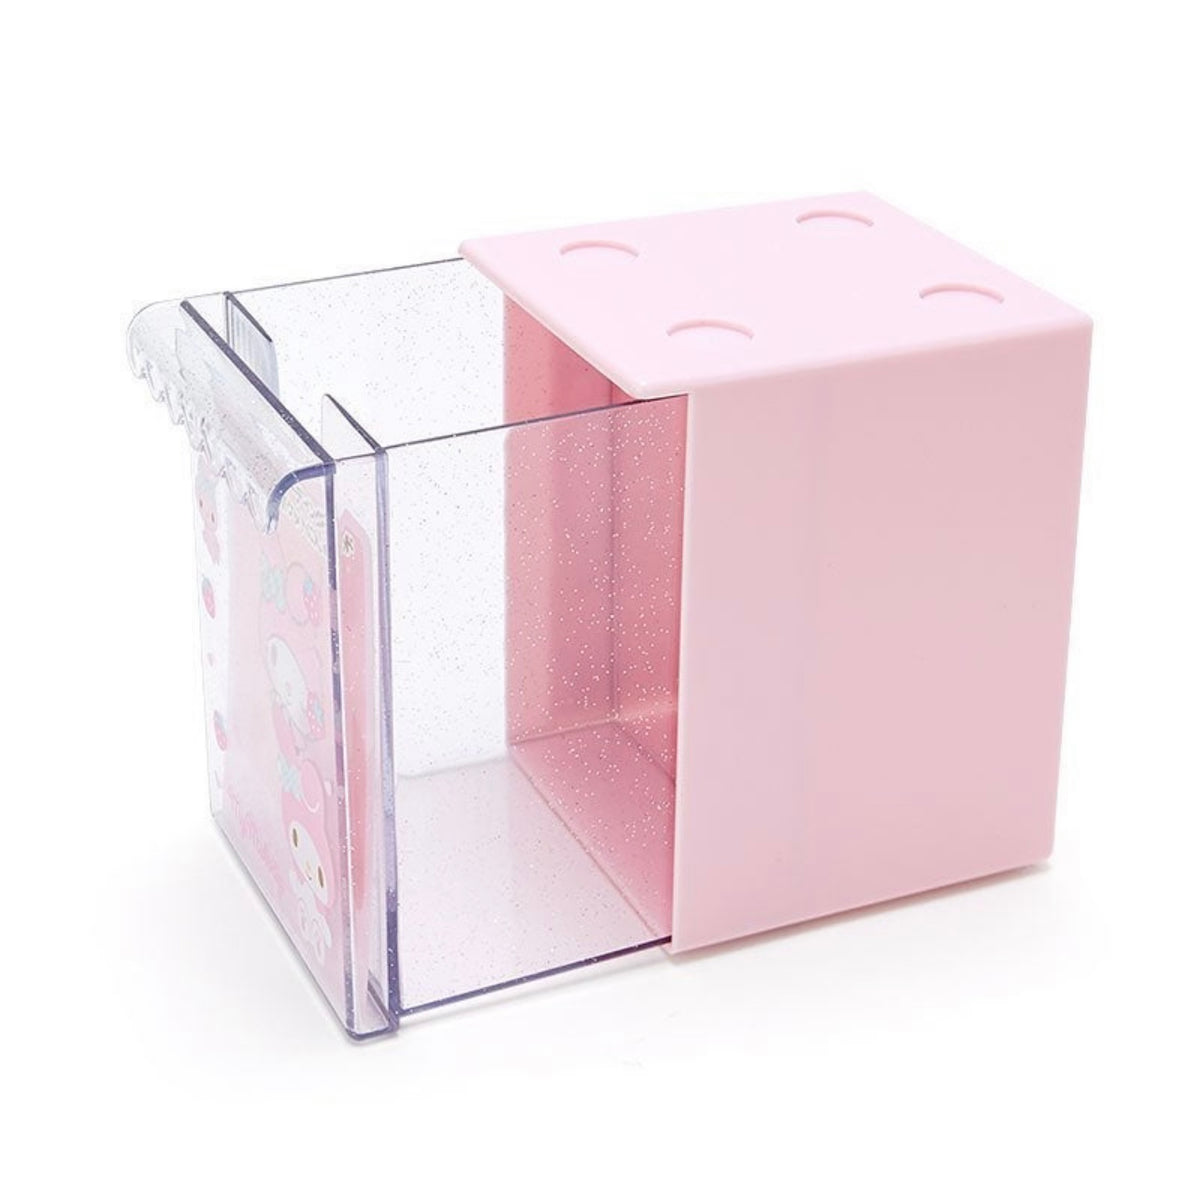  Sanrio 240923 Sanrio Storage Case, Approx. Width 12.6 x Depth  8.7 x Height 5.9 inches (32 x 22 x 15 cm), Polypropylene, Clear,  Chromi-chan Character : Home & Kitchen